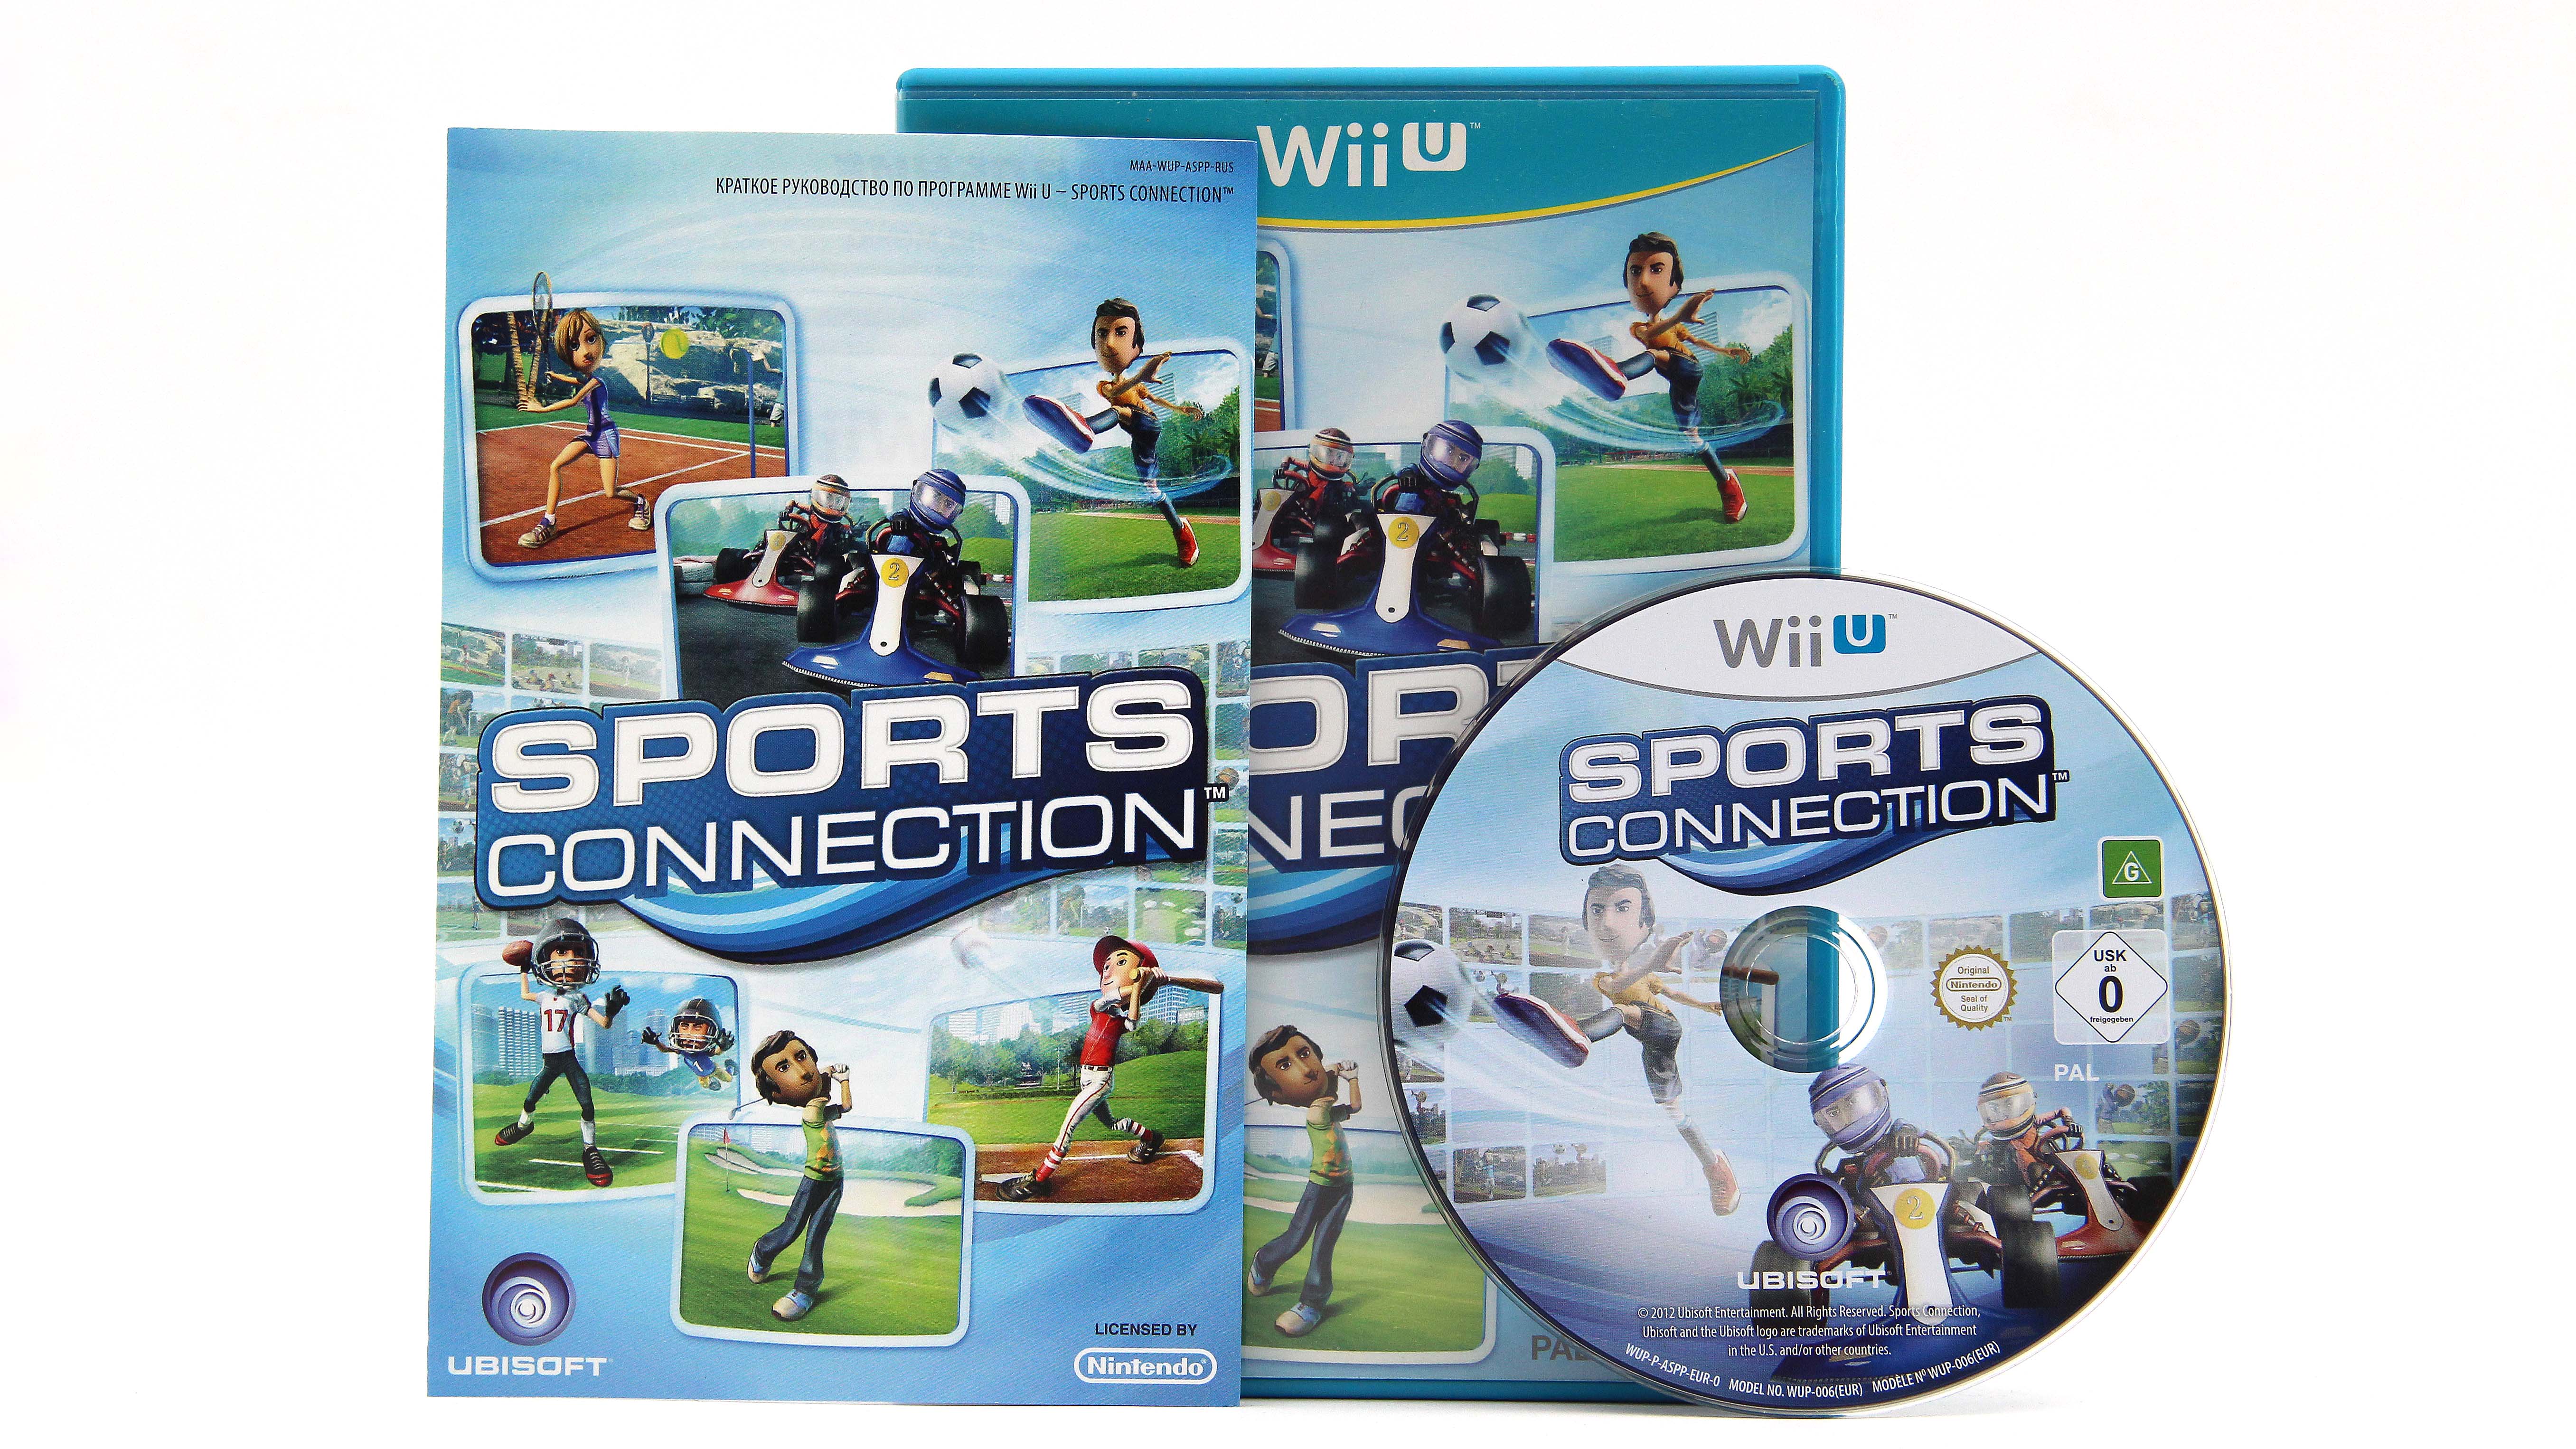 Sport connect. Nintendo Wii Fishing. Sports connection.